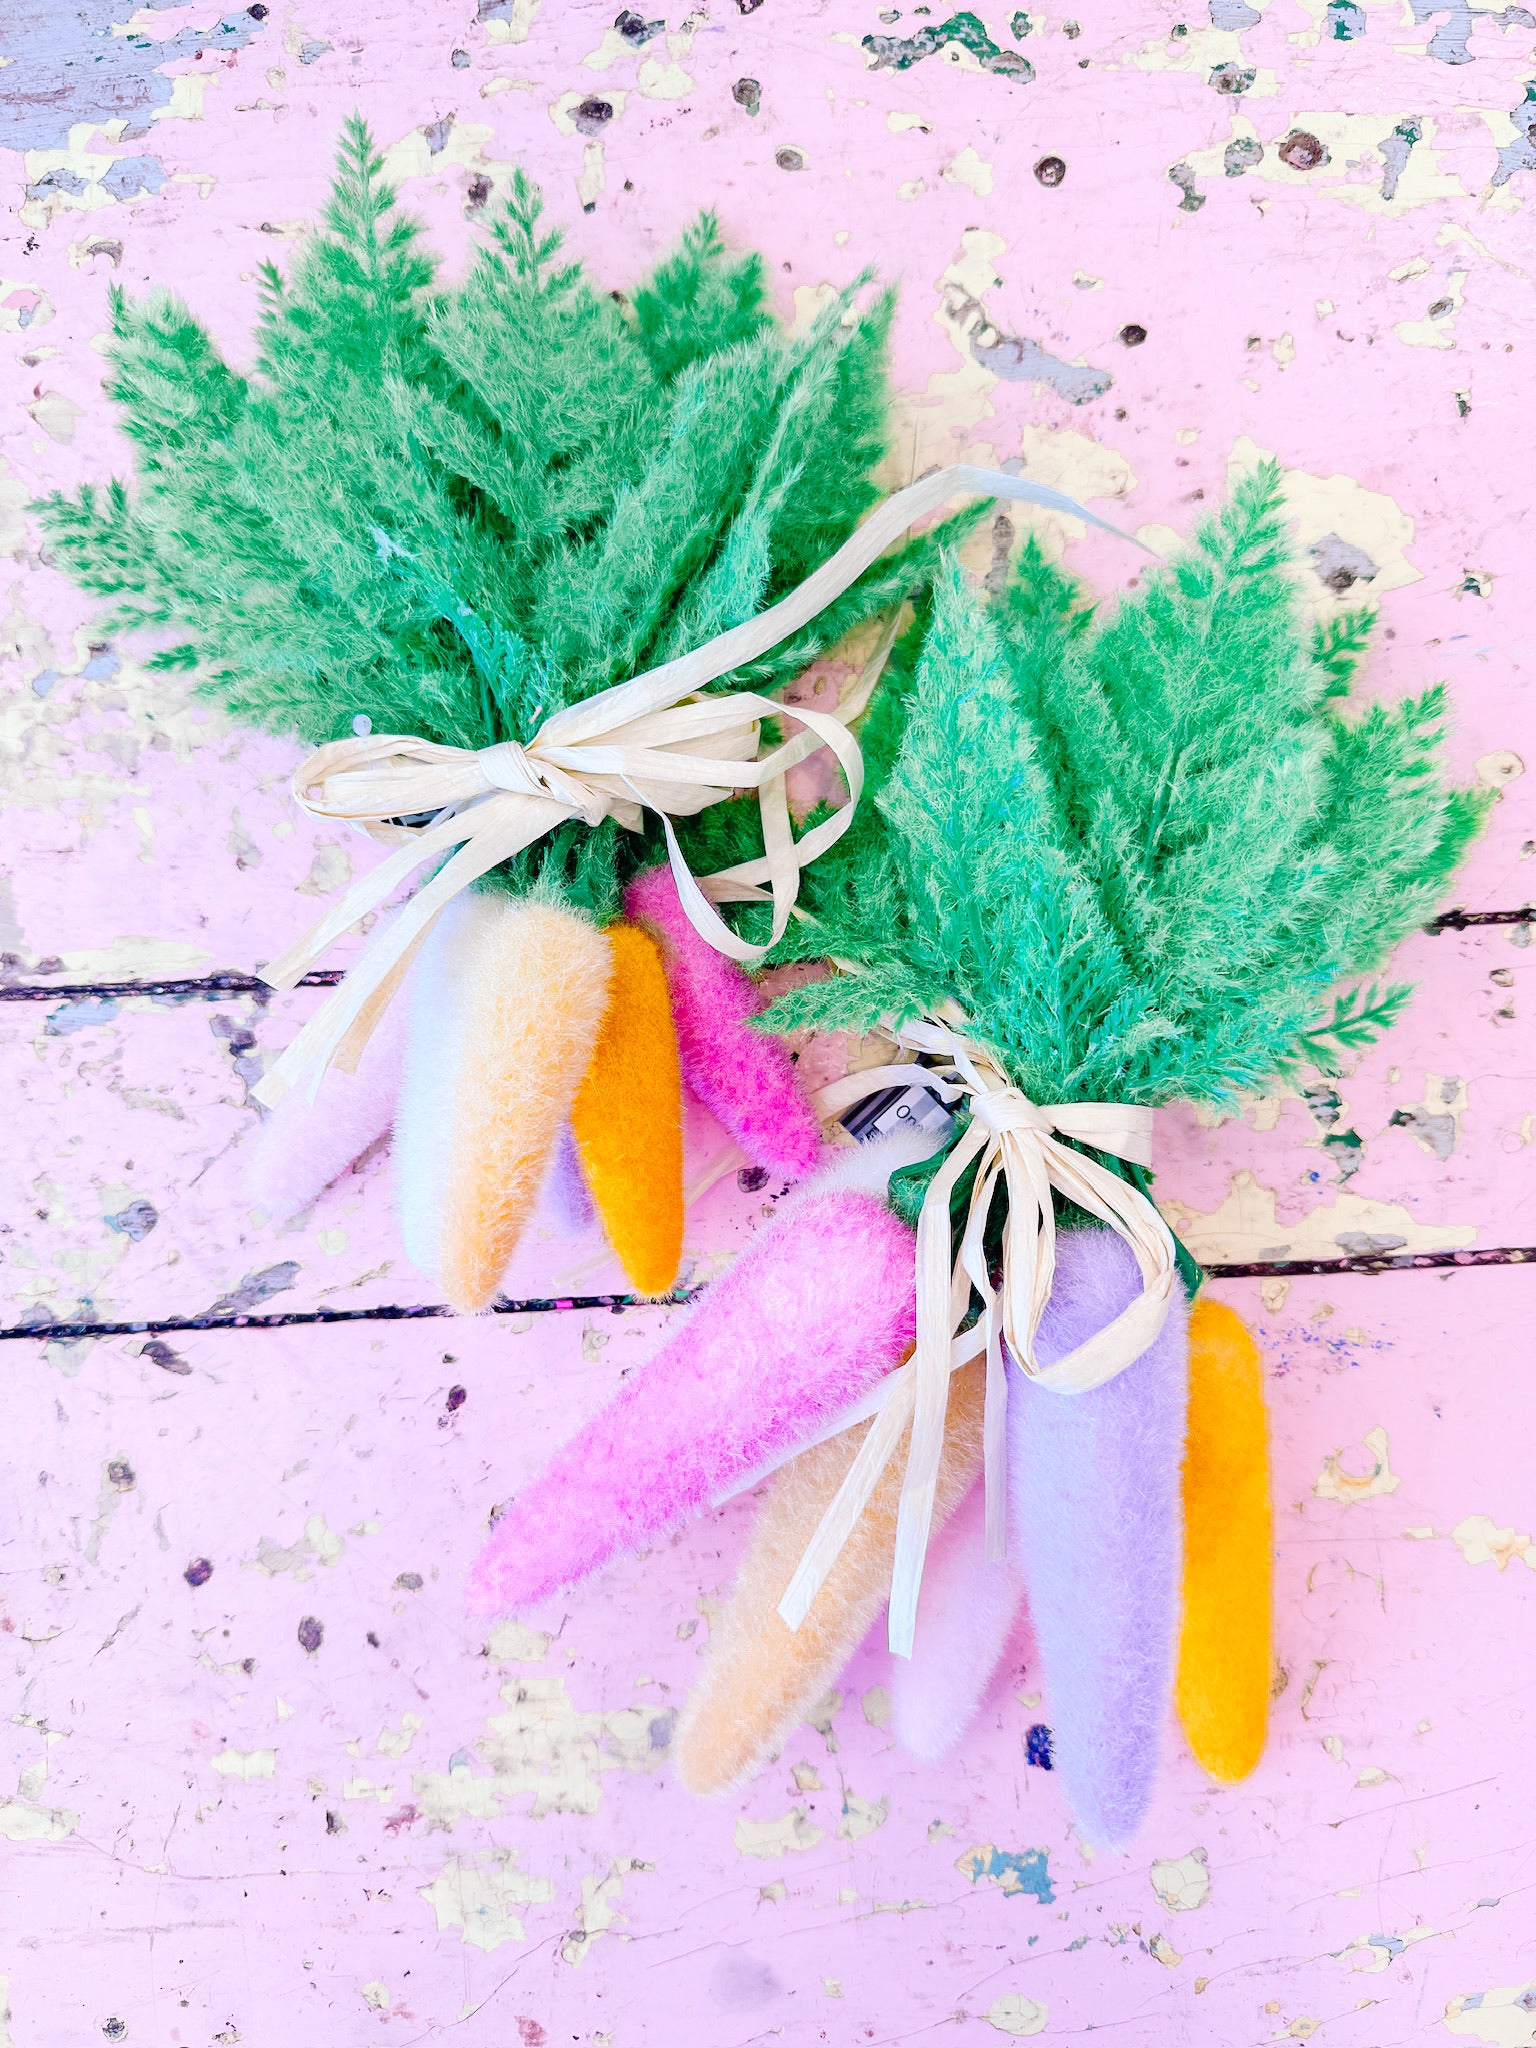 SM FLOCKED CARROT CLUSTER OF 6 - COLORFUL